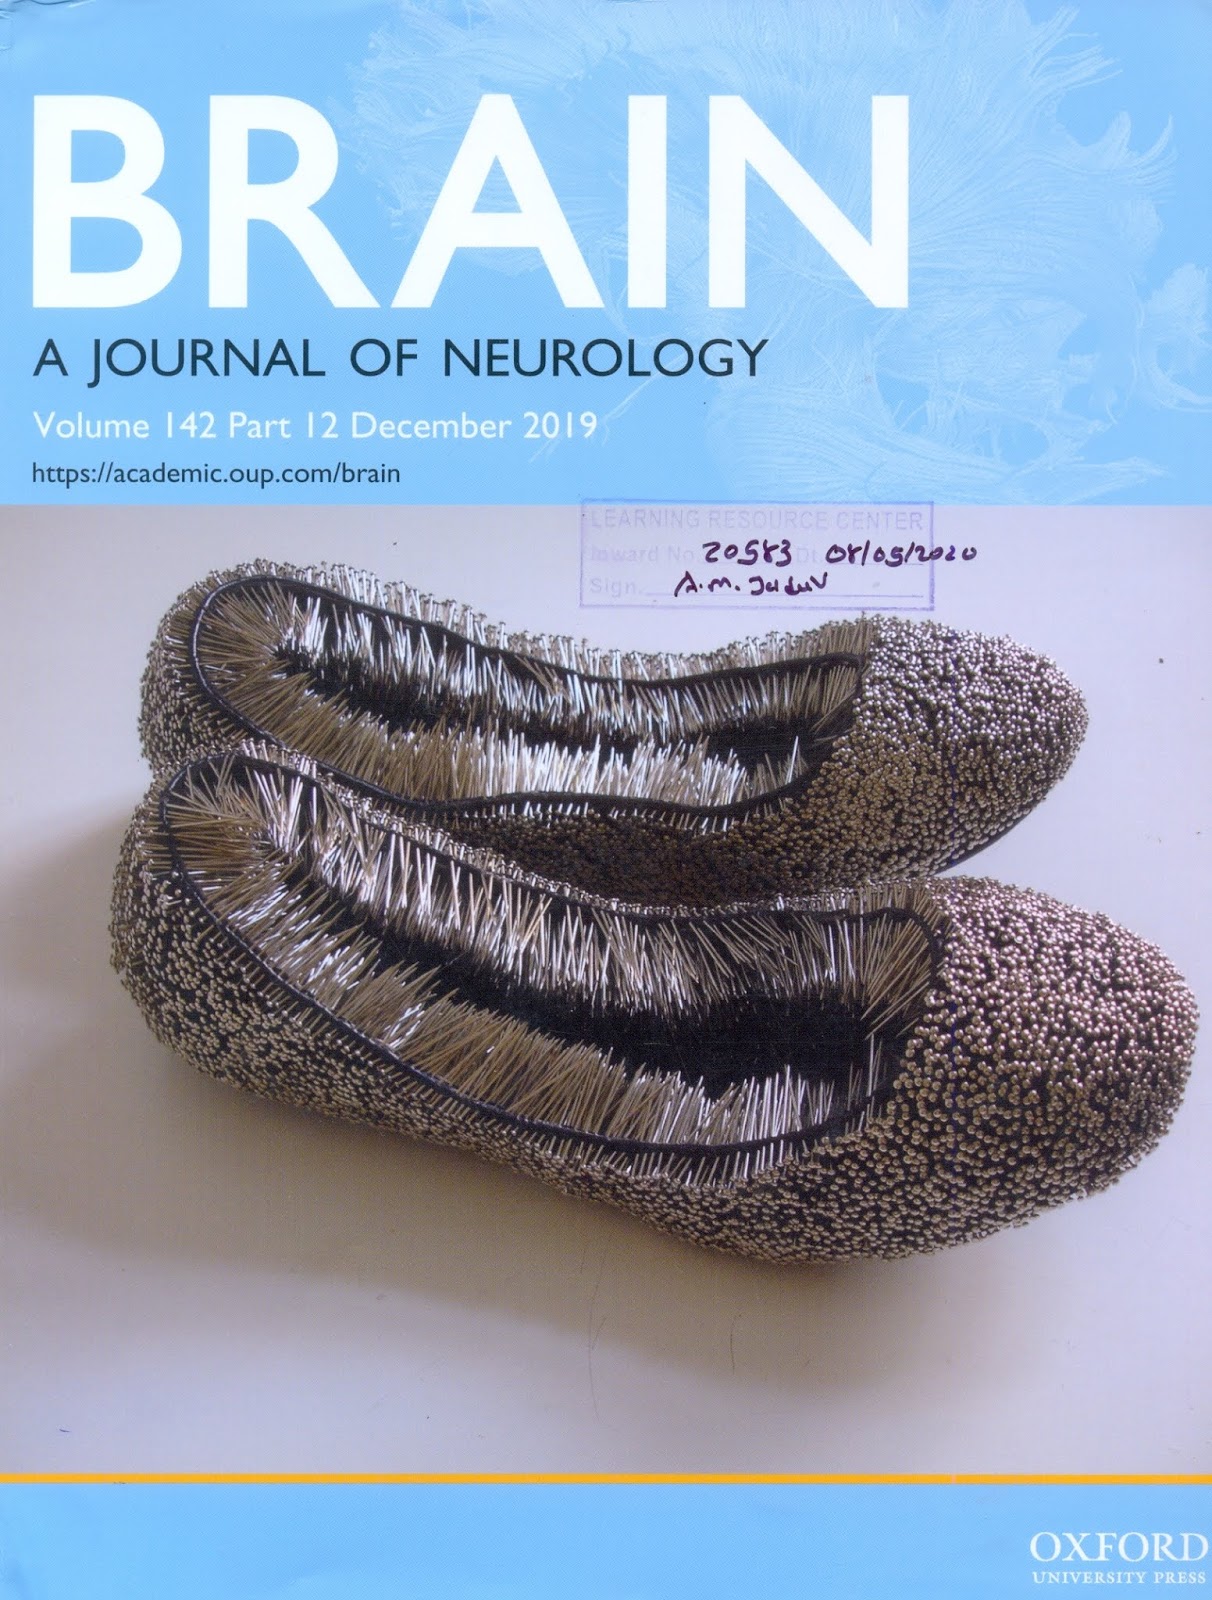 https://academic.oup.com/brain/issue/142/12